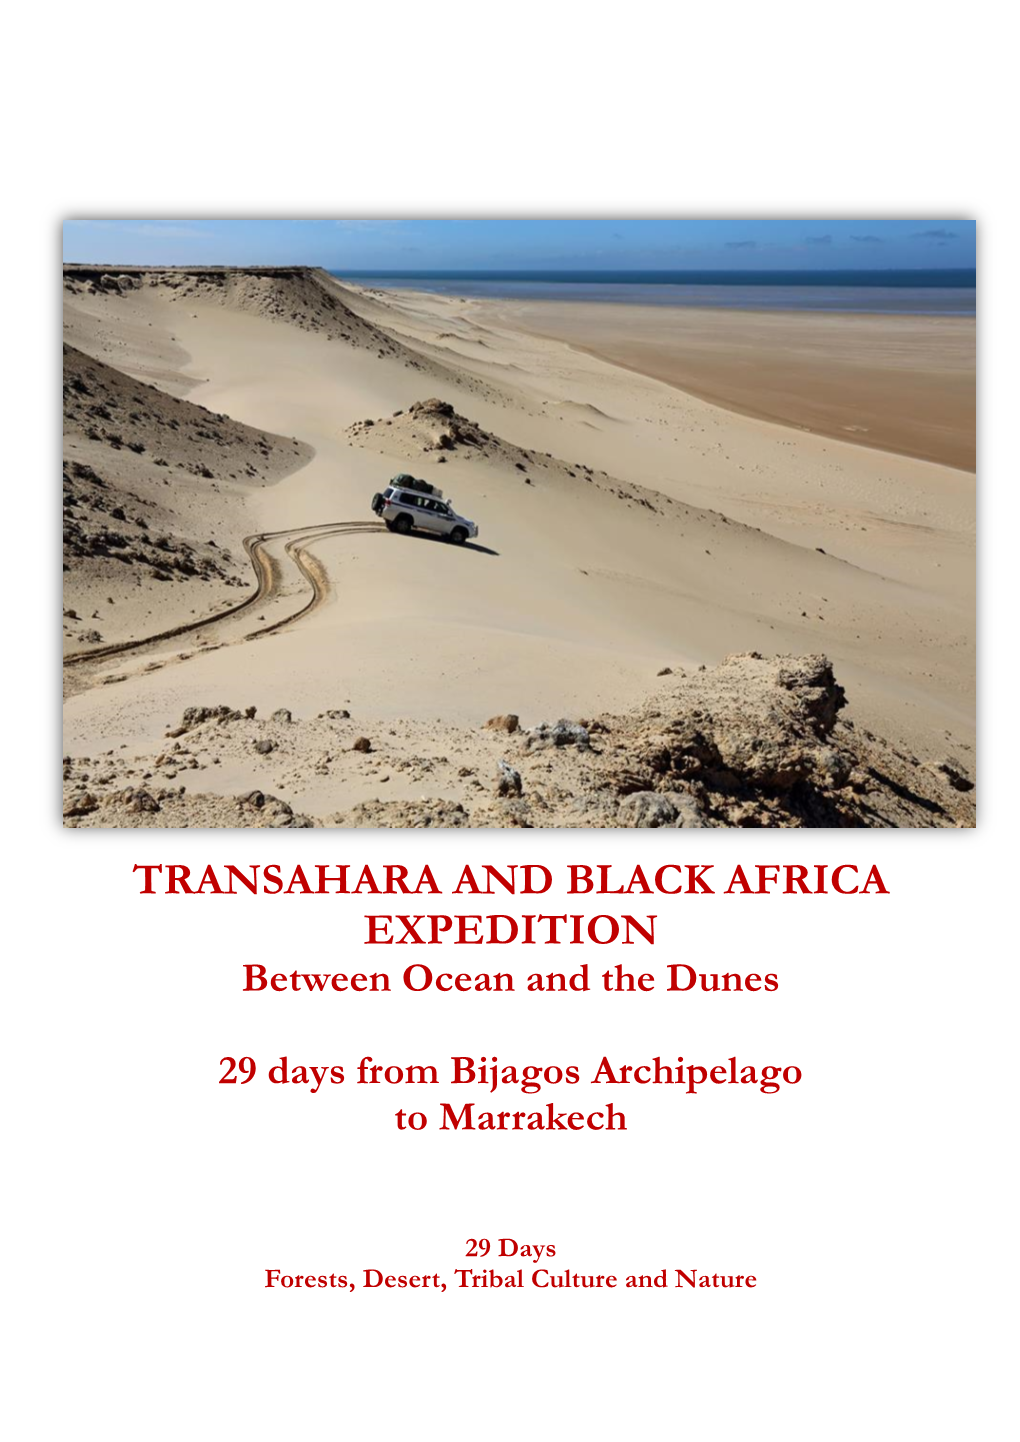 TRANSAHARA and BLACK AFRICA EXPEDITION Between Ocean and the Dunes